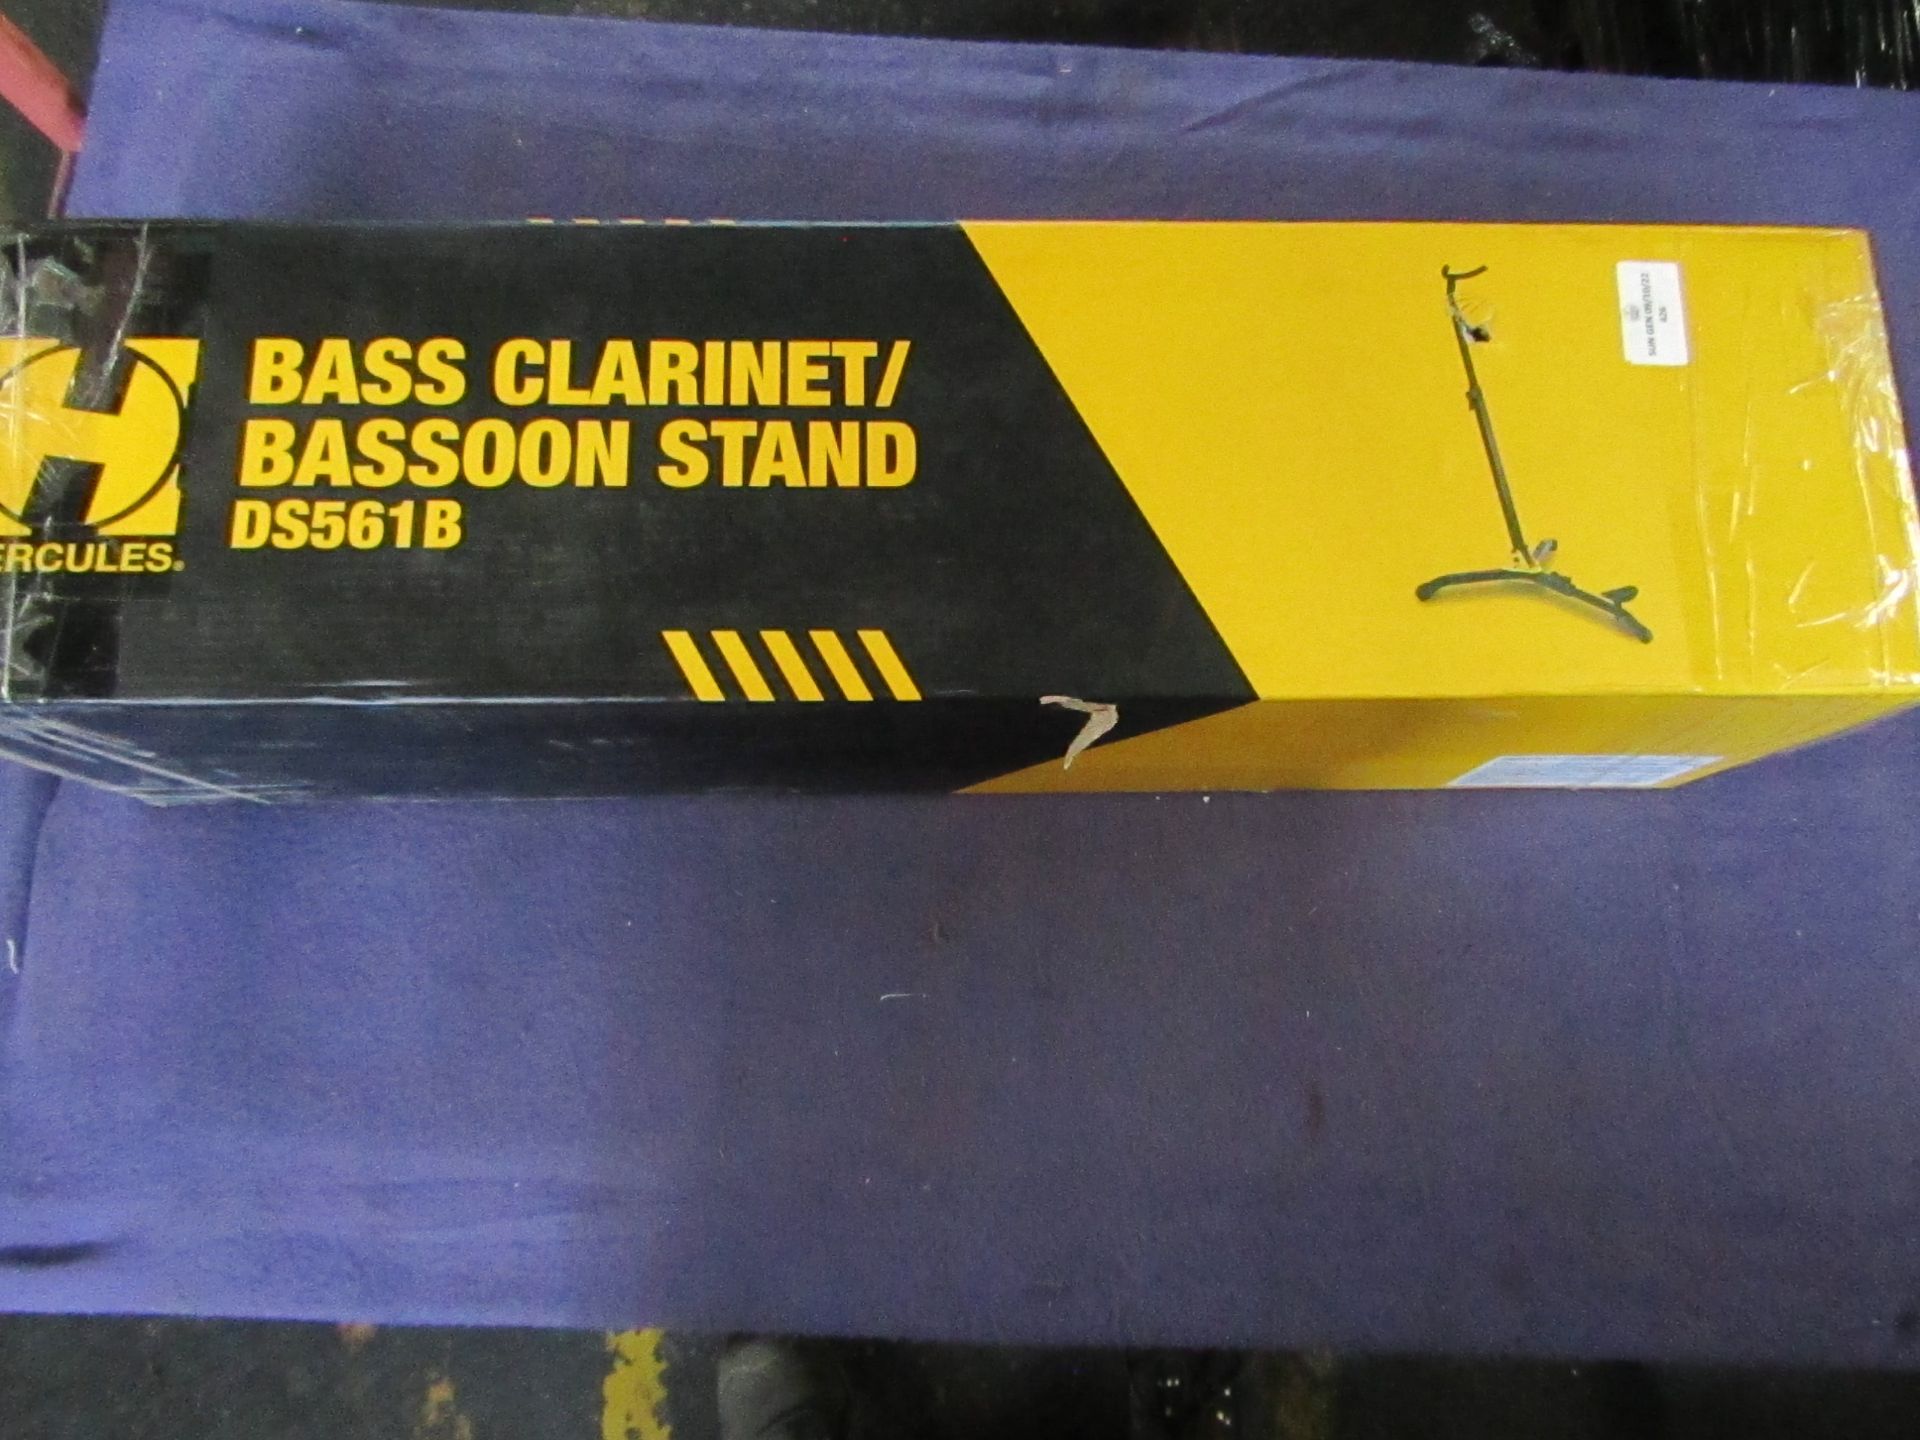 Hercules - Bass Clarinet Bassoon Stand - New & Boxed.